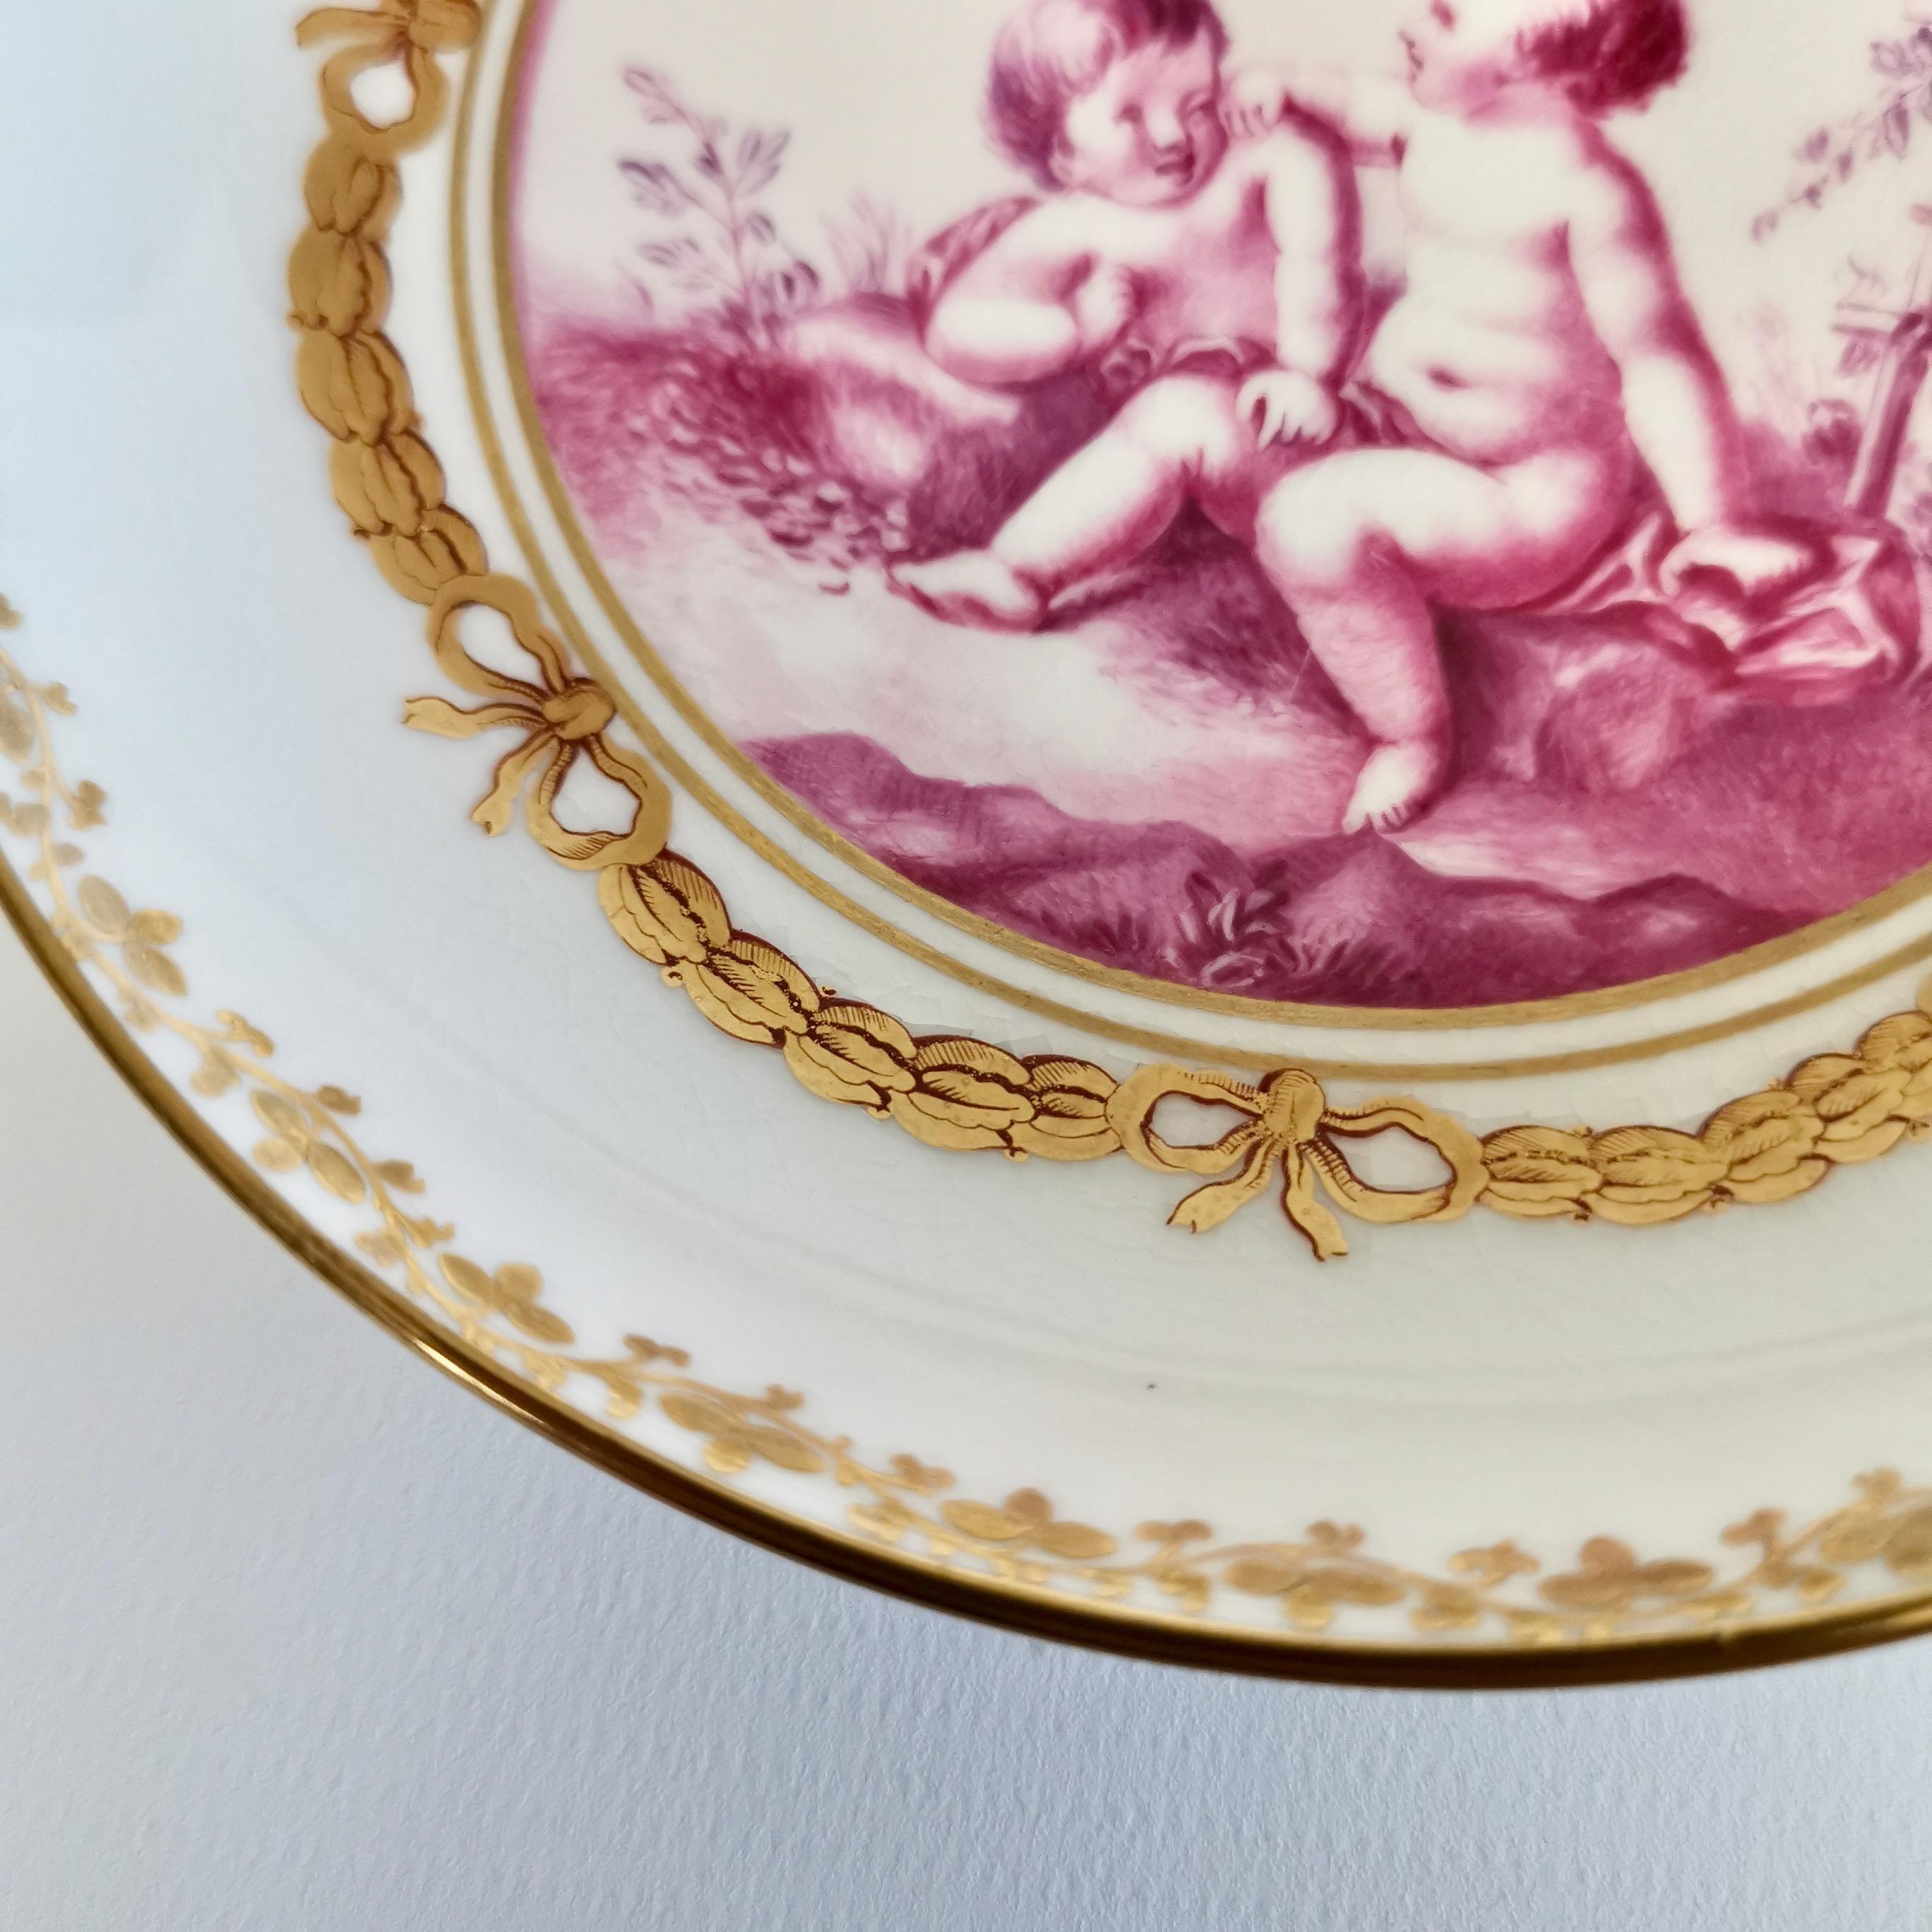 Kerr & Binns Worcester Porcelain Cup and Saucer, Puce Putti Playing, circa 1855 9